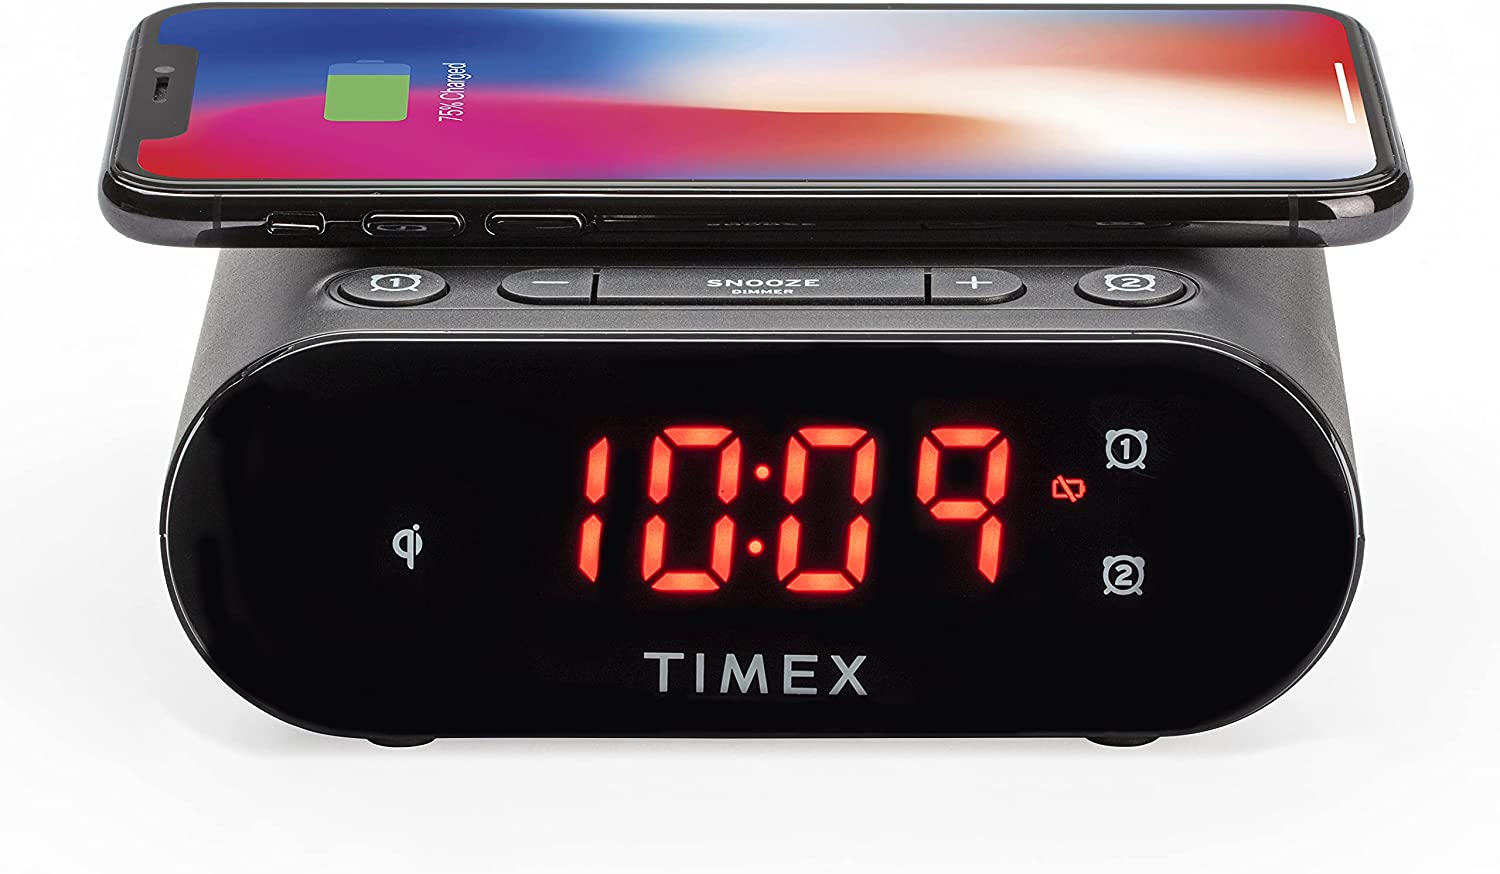 TIMEX TW300 Dual Alarm Clock with Wireless Charging User Guide